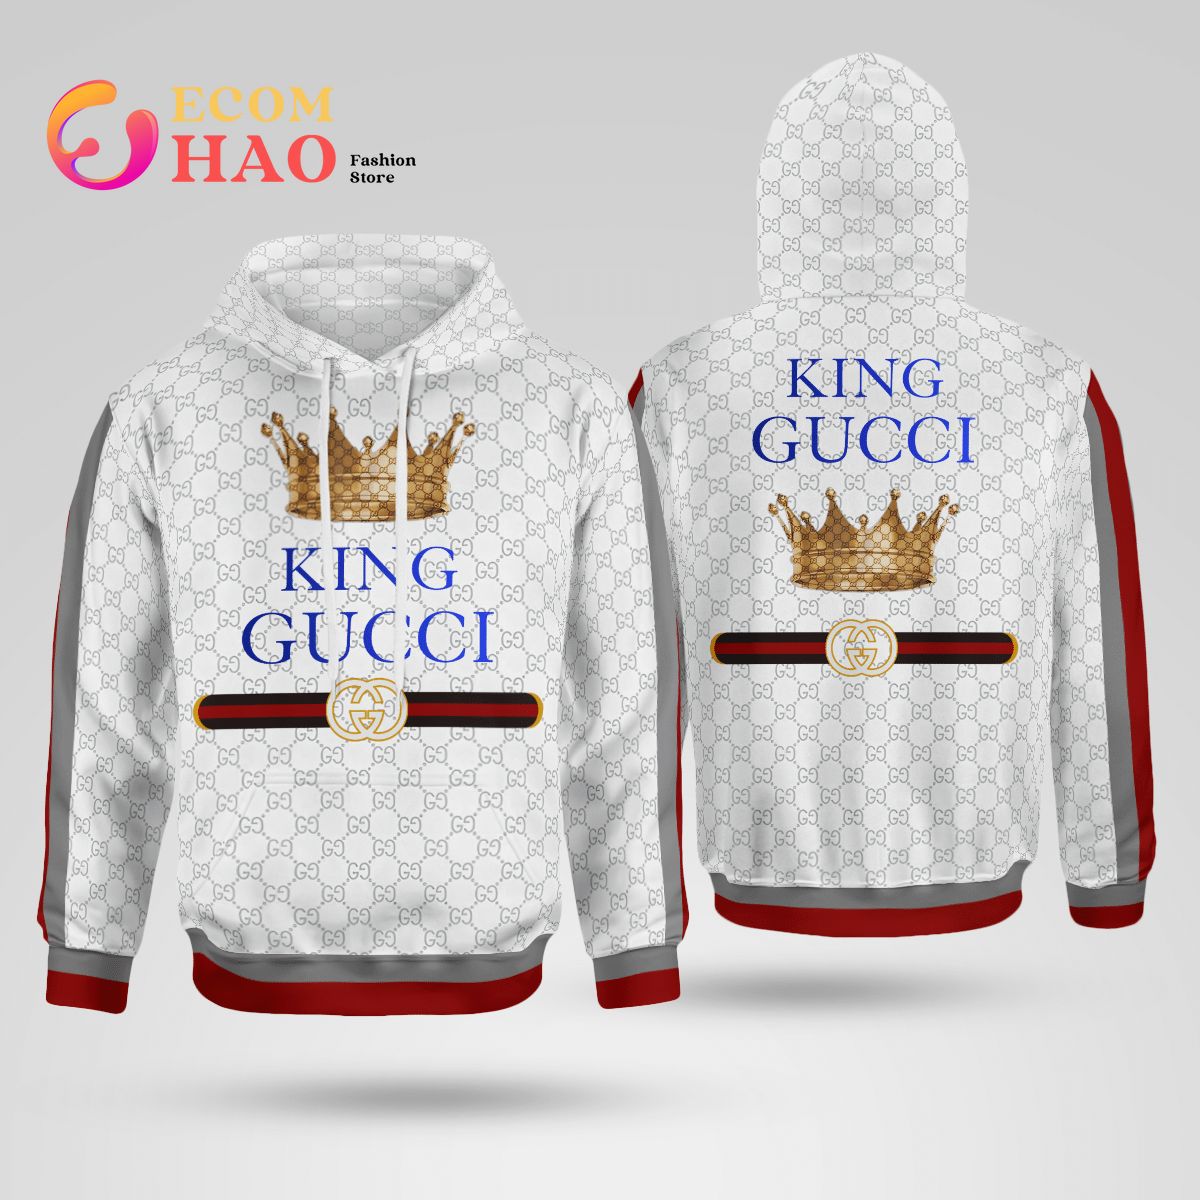 King Gucci white pattern 3D Hoodie - Ecomhao Store